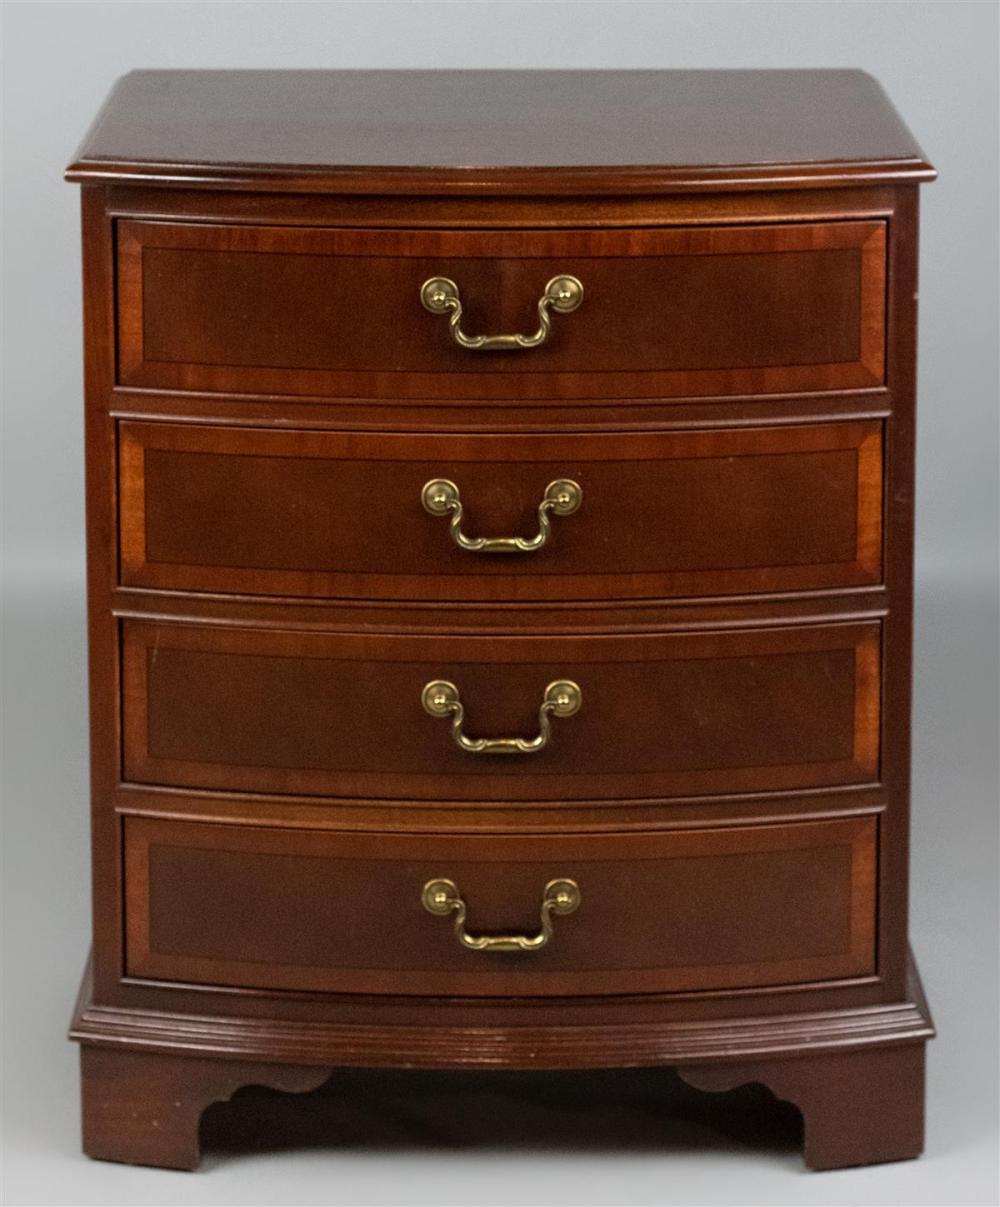 ETHAN ALLEN CHIPPENDALE STYLE MAHOGANY